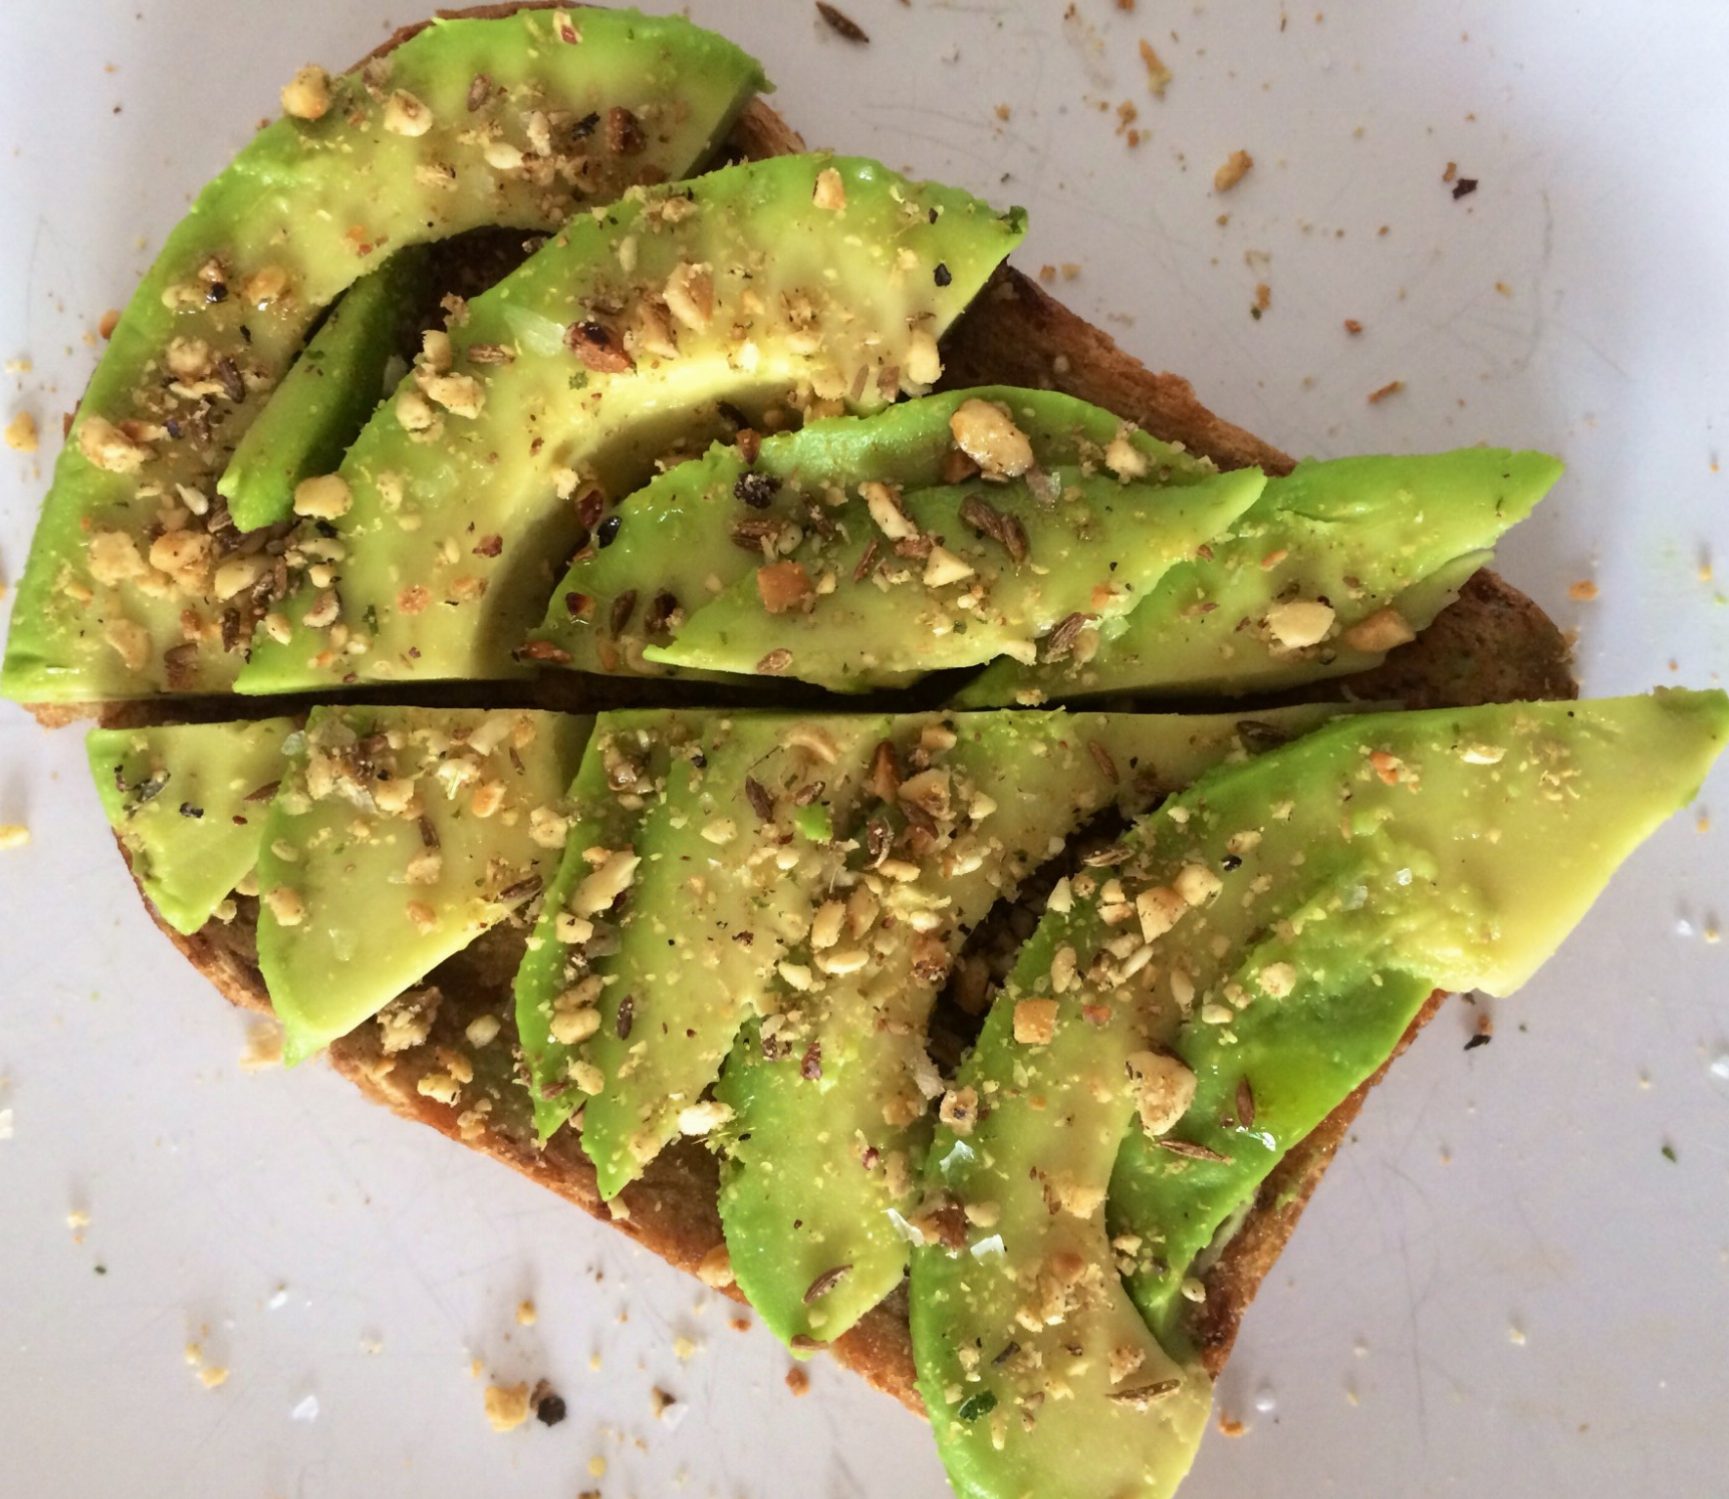 Eating toast (with avocado and dukkah).